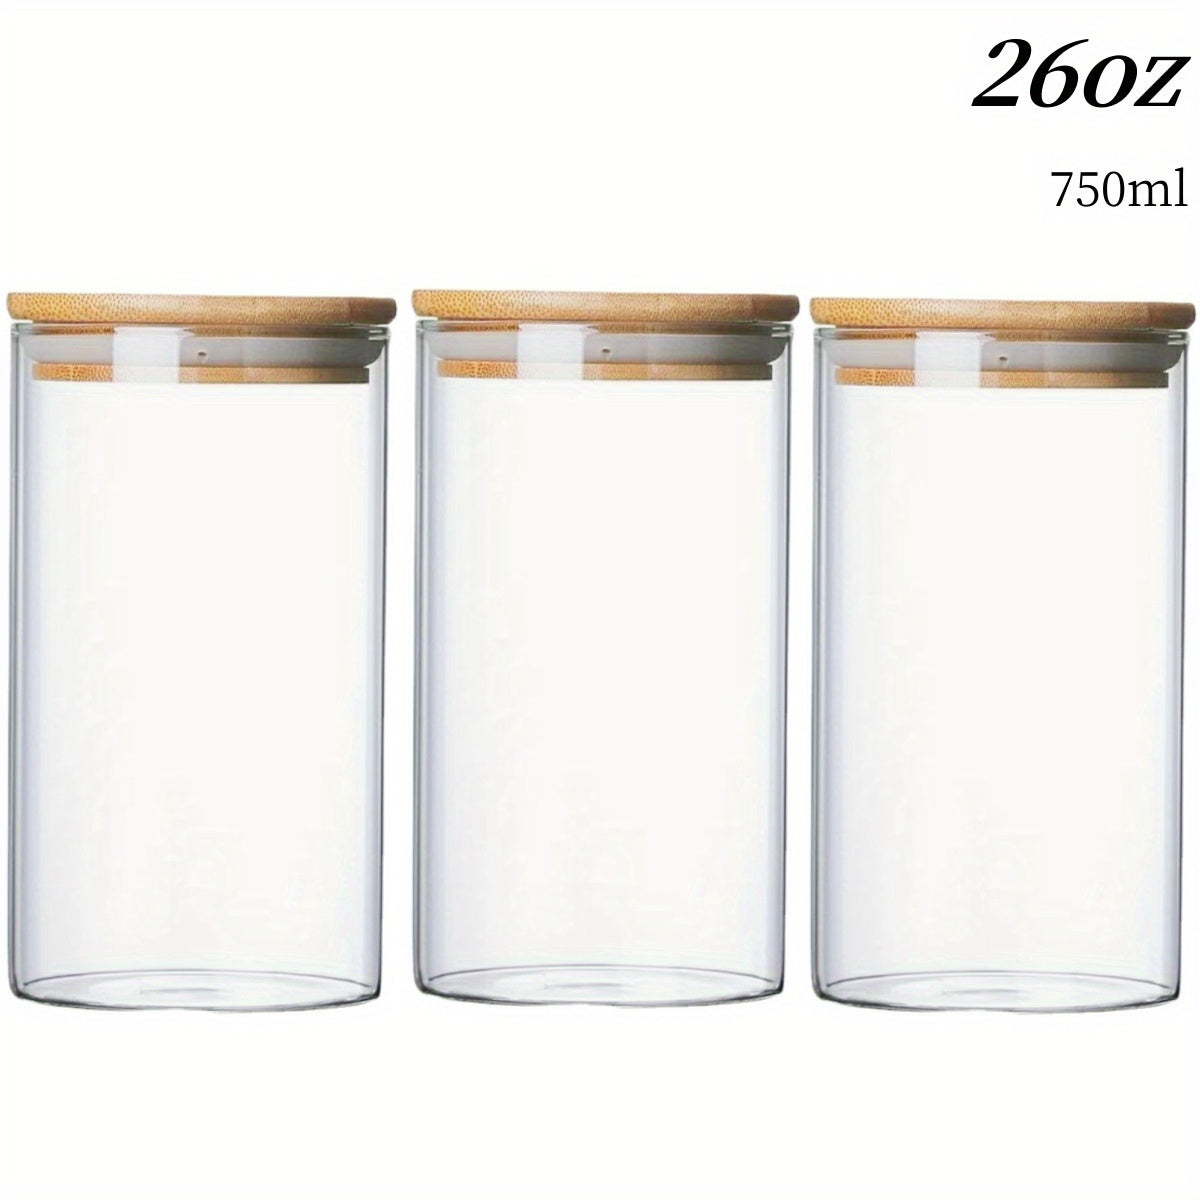 1/2/3/4pack, Candy Jar, Cookie Jar, Honey Jar, Butter Jar, Glass Storage Jar With Sealing Bamboo Lid, Clear Glass Bulk Food Storage Jar, Spice Jar, For Serving Tea, Coffee, Spices, Candy, Biscuit, Kitchen Accessories